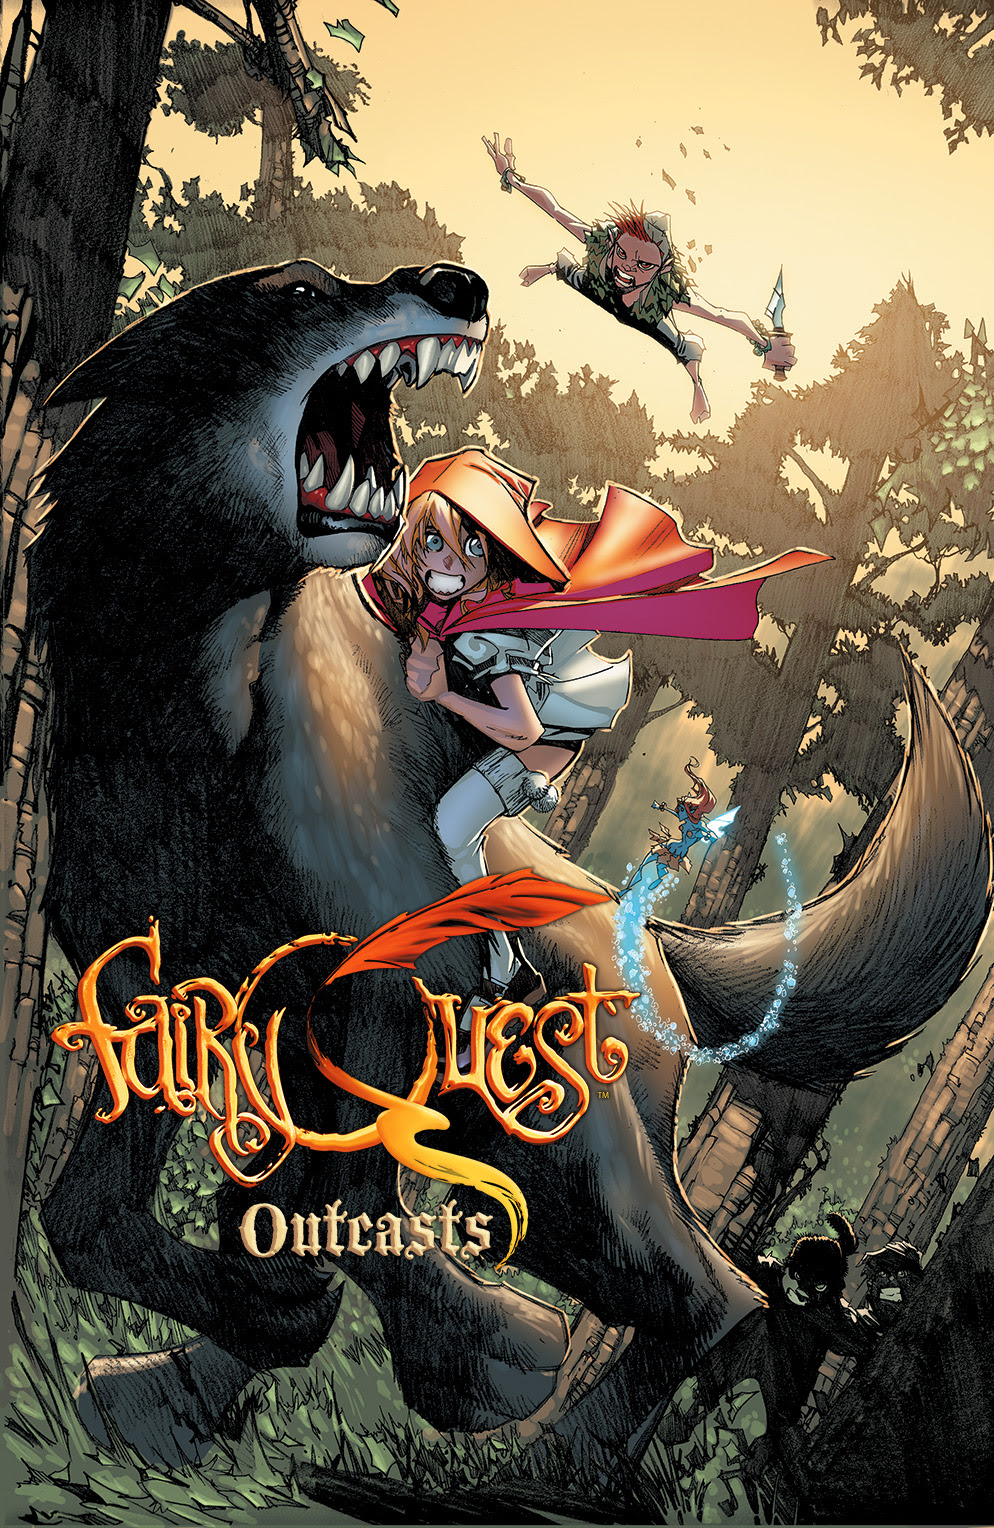 FAIRY QUEST: OUTCASTS #1 Cover A by Humberto Ramos